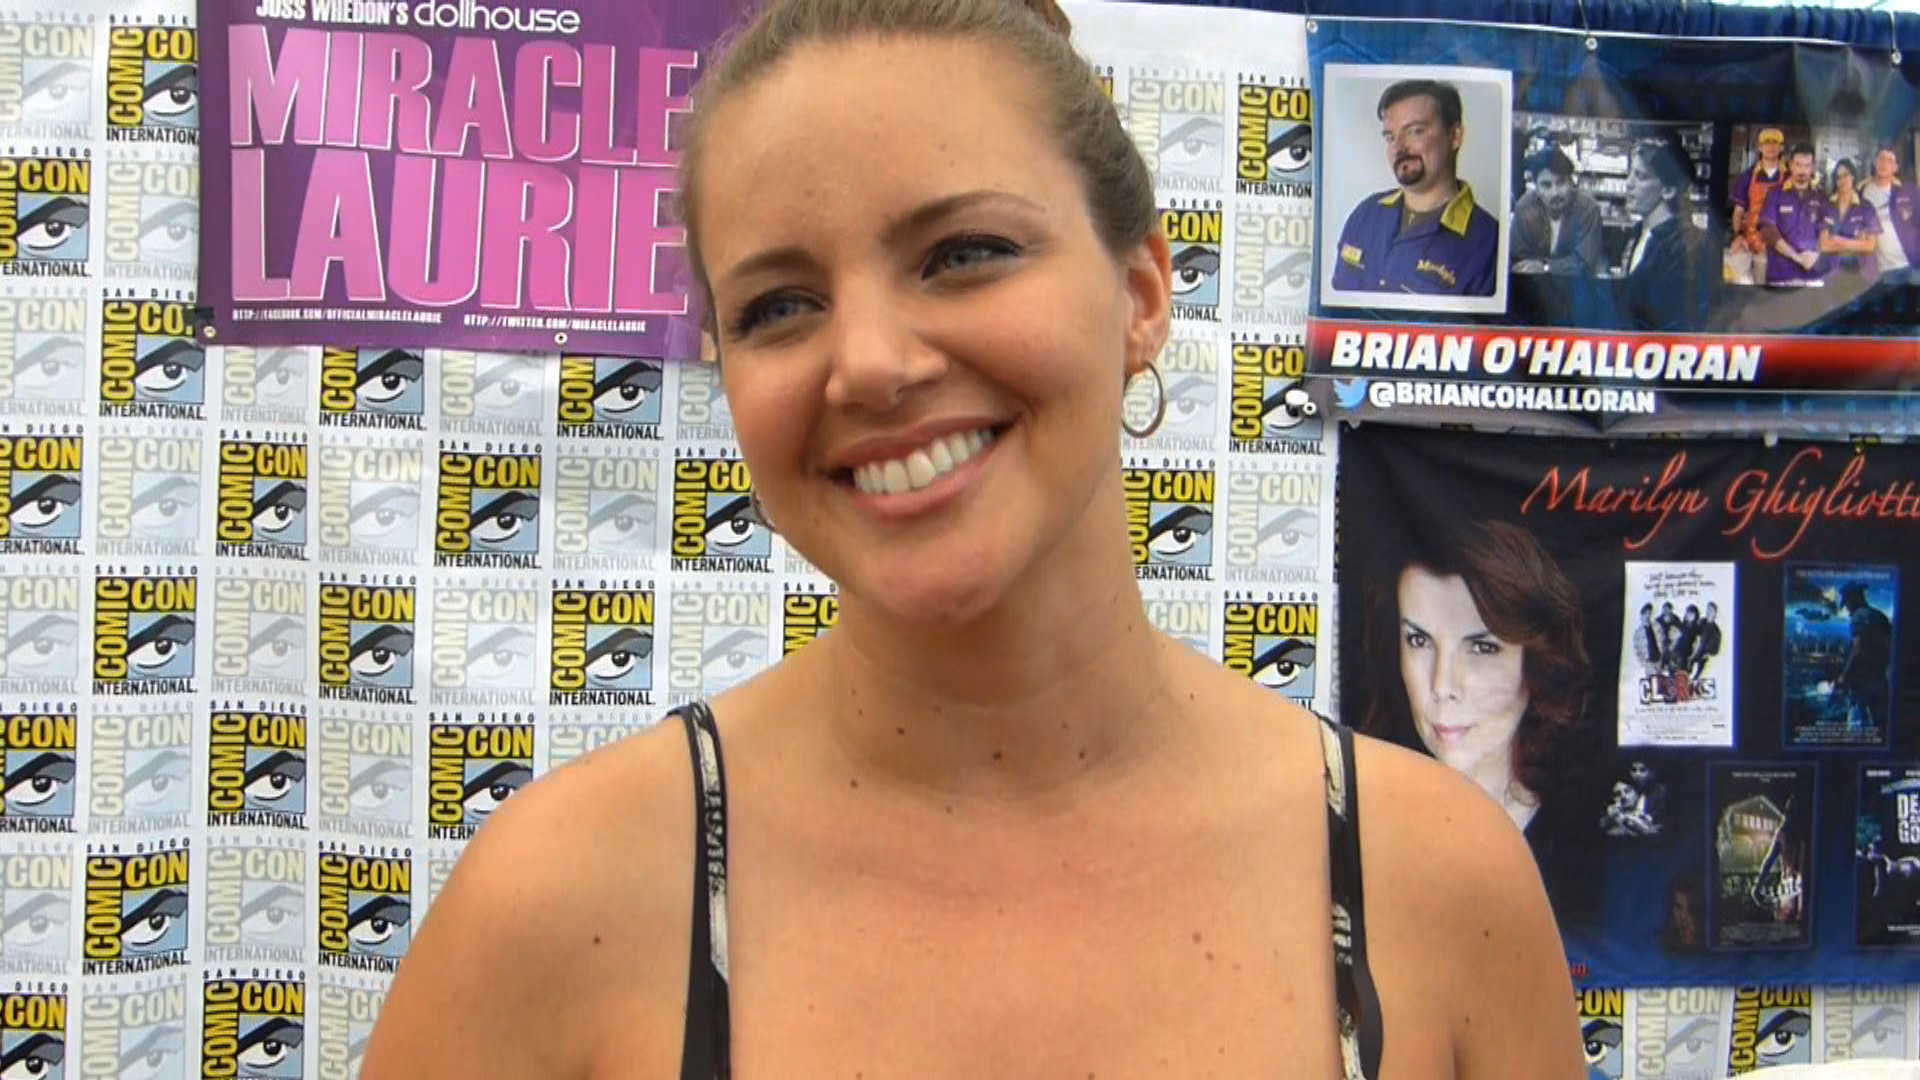 SDCC 2015: Miracle Laurie Exclusive Interview